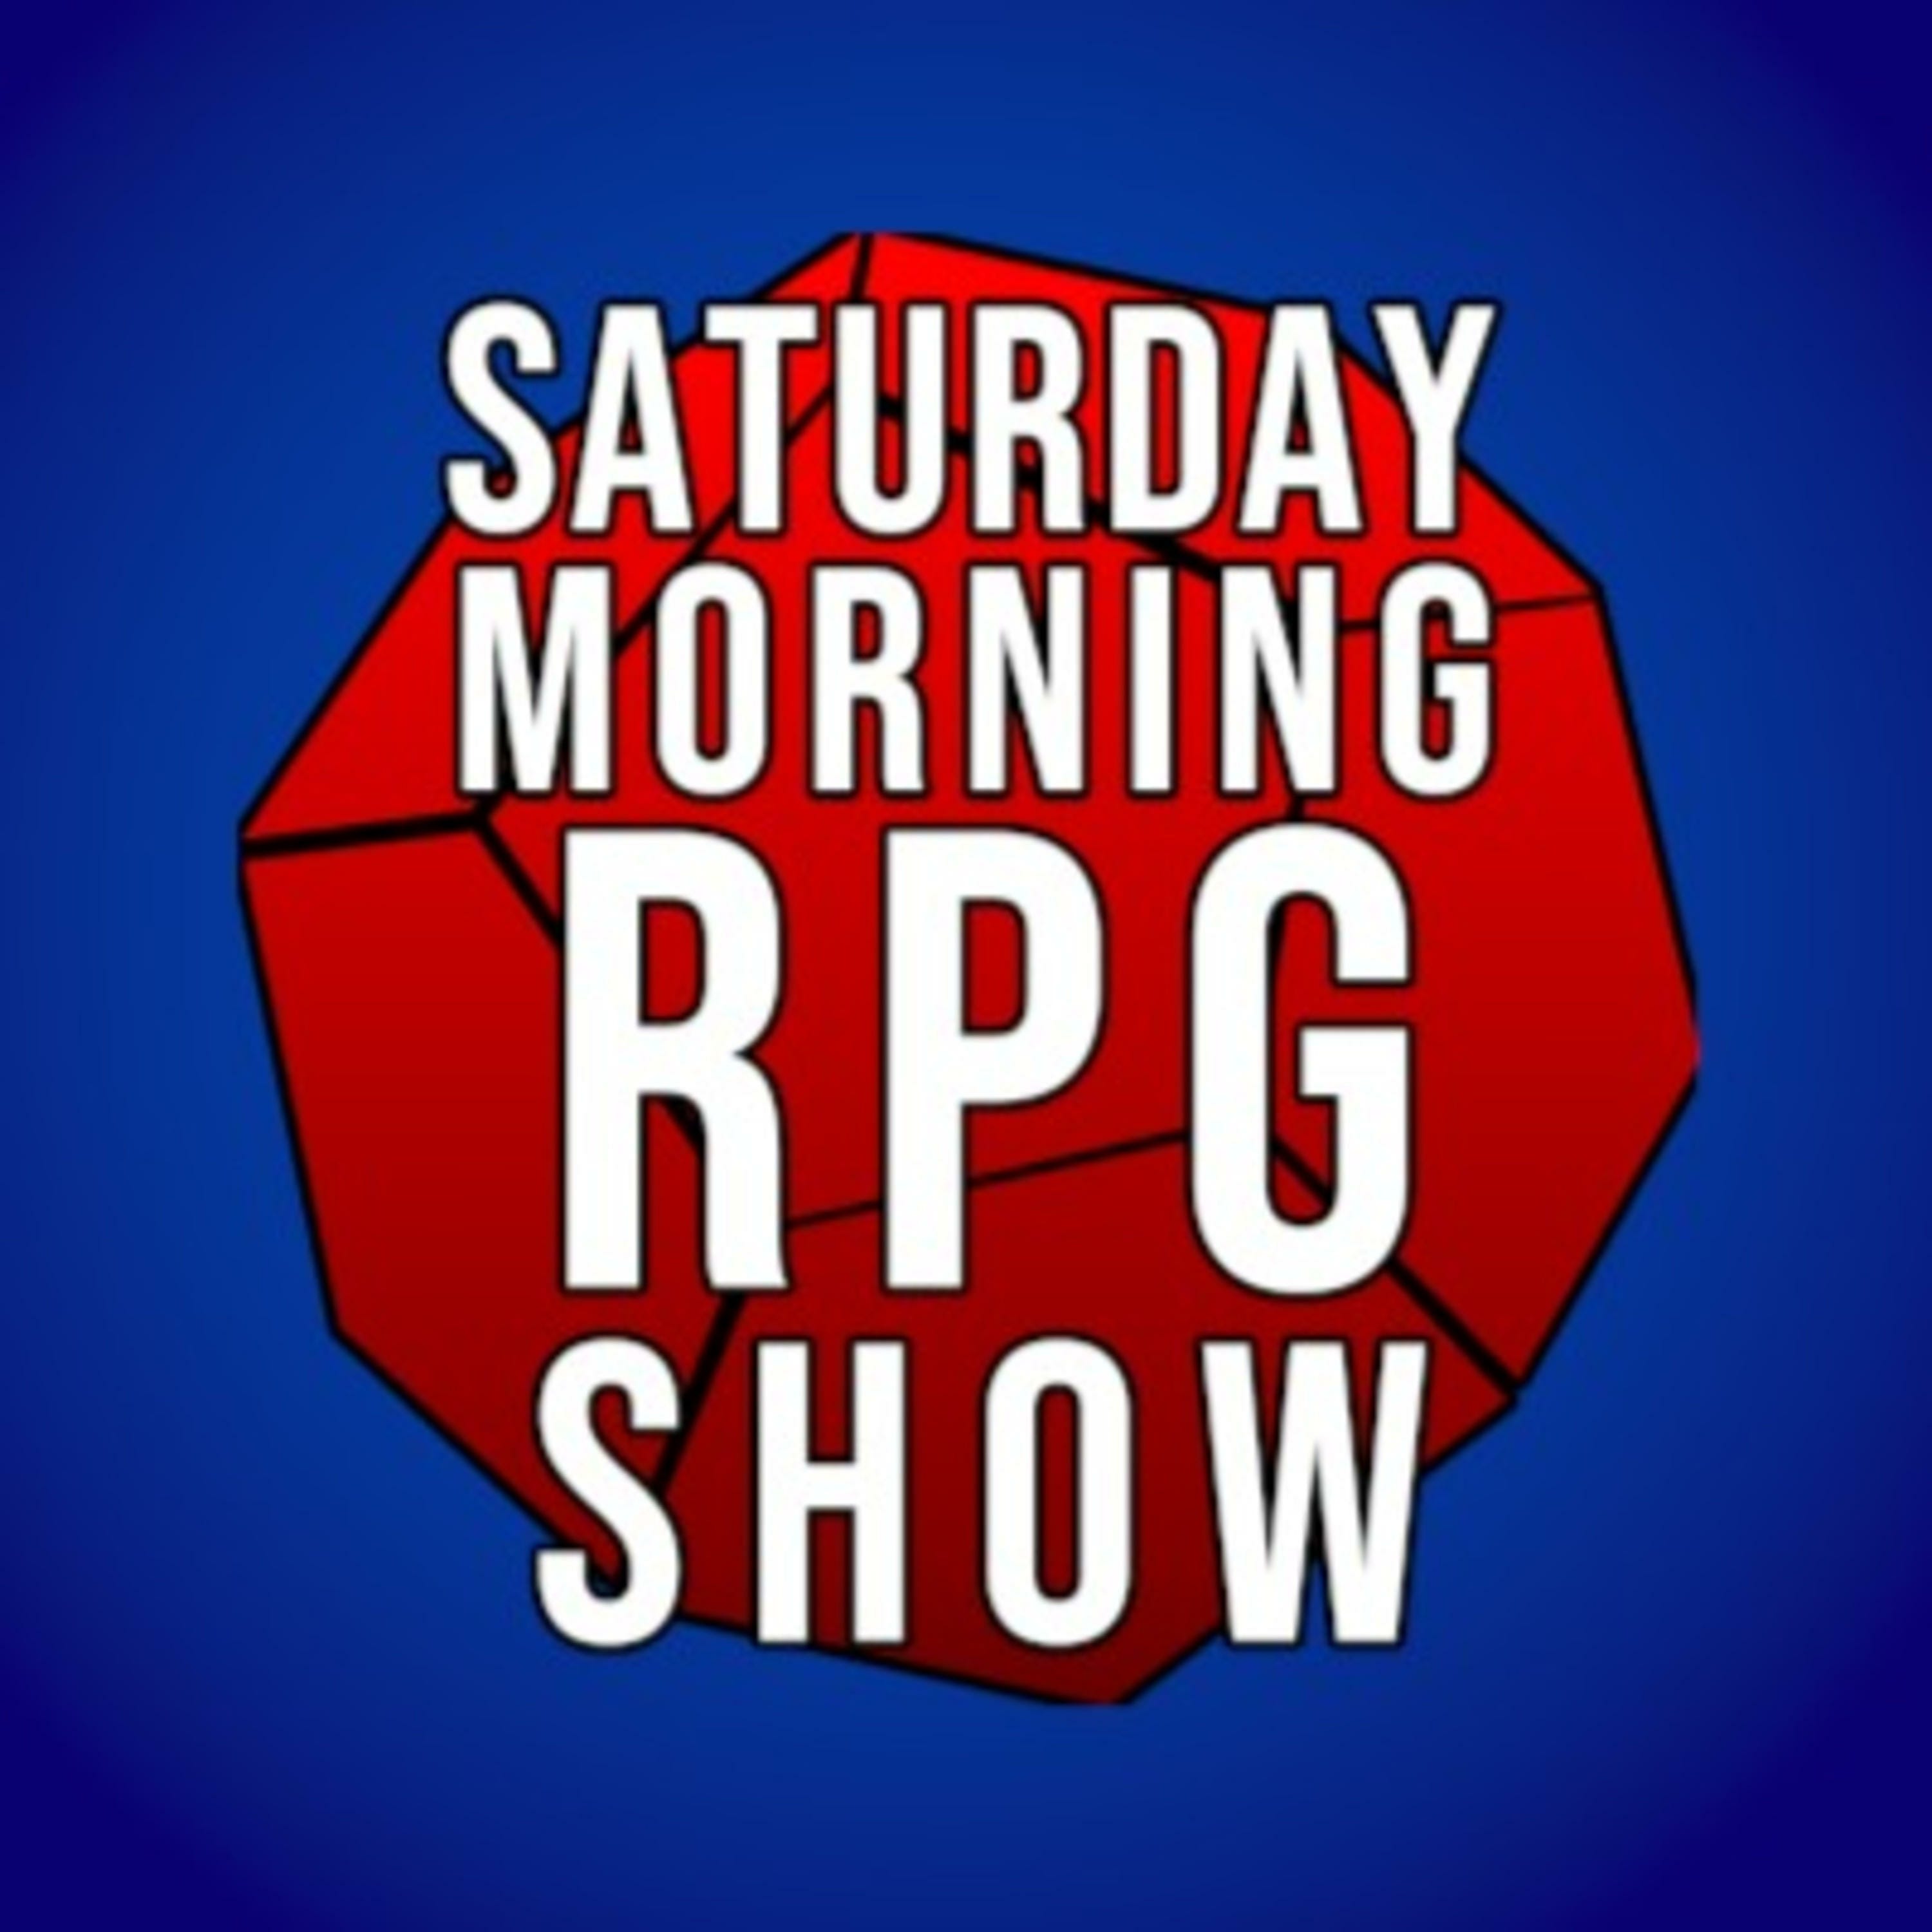 Ep 107 - MTG: Theros, Ravnica, and more in Dungeons & Dragons